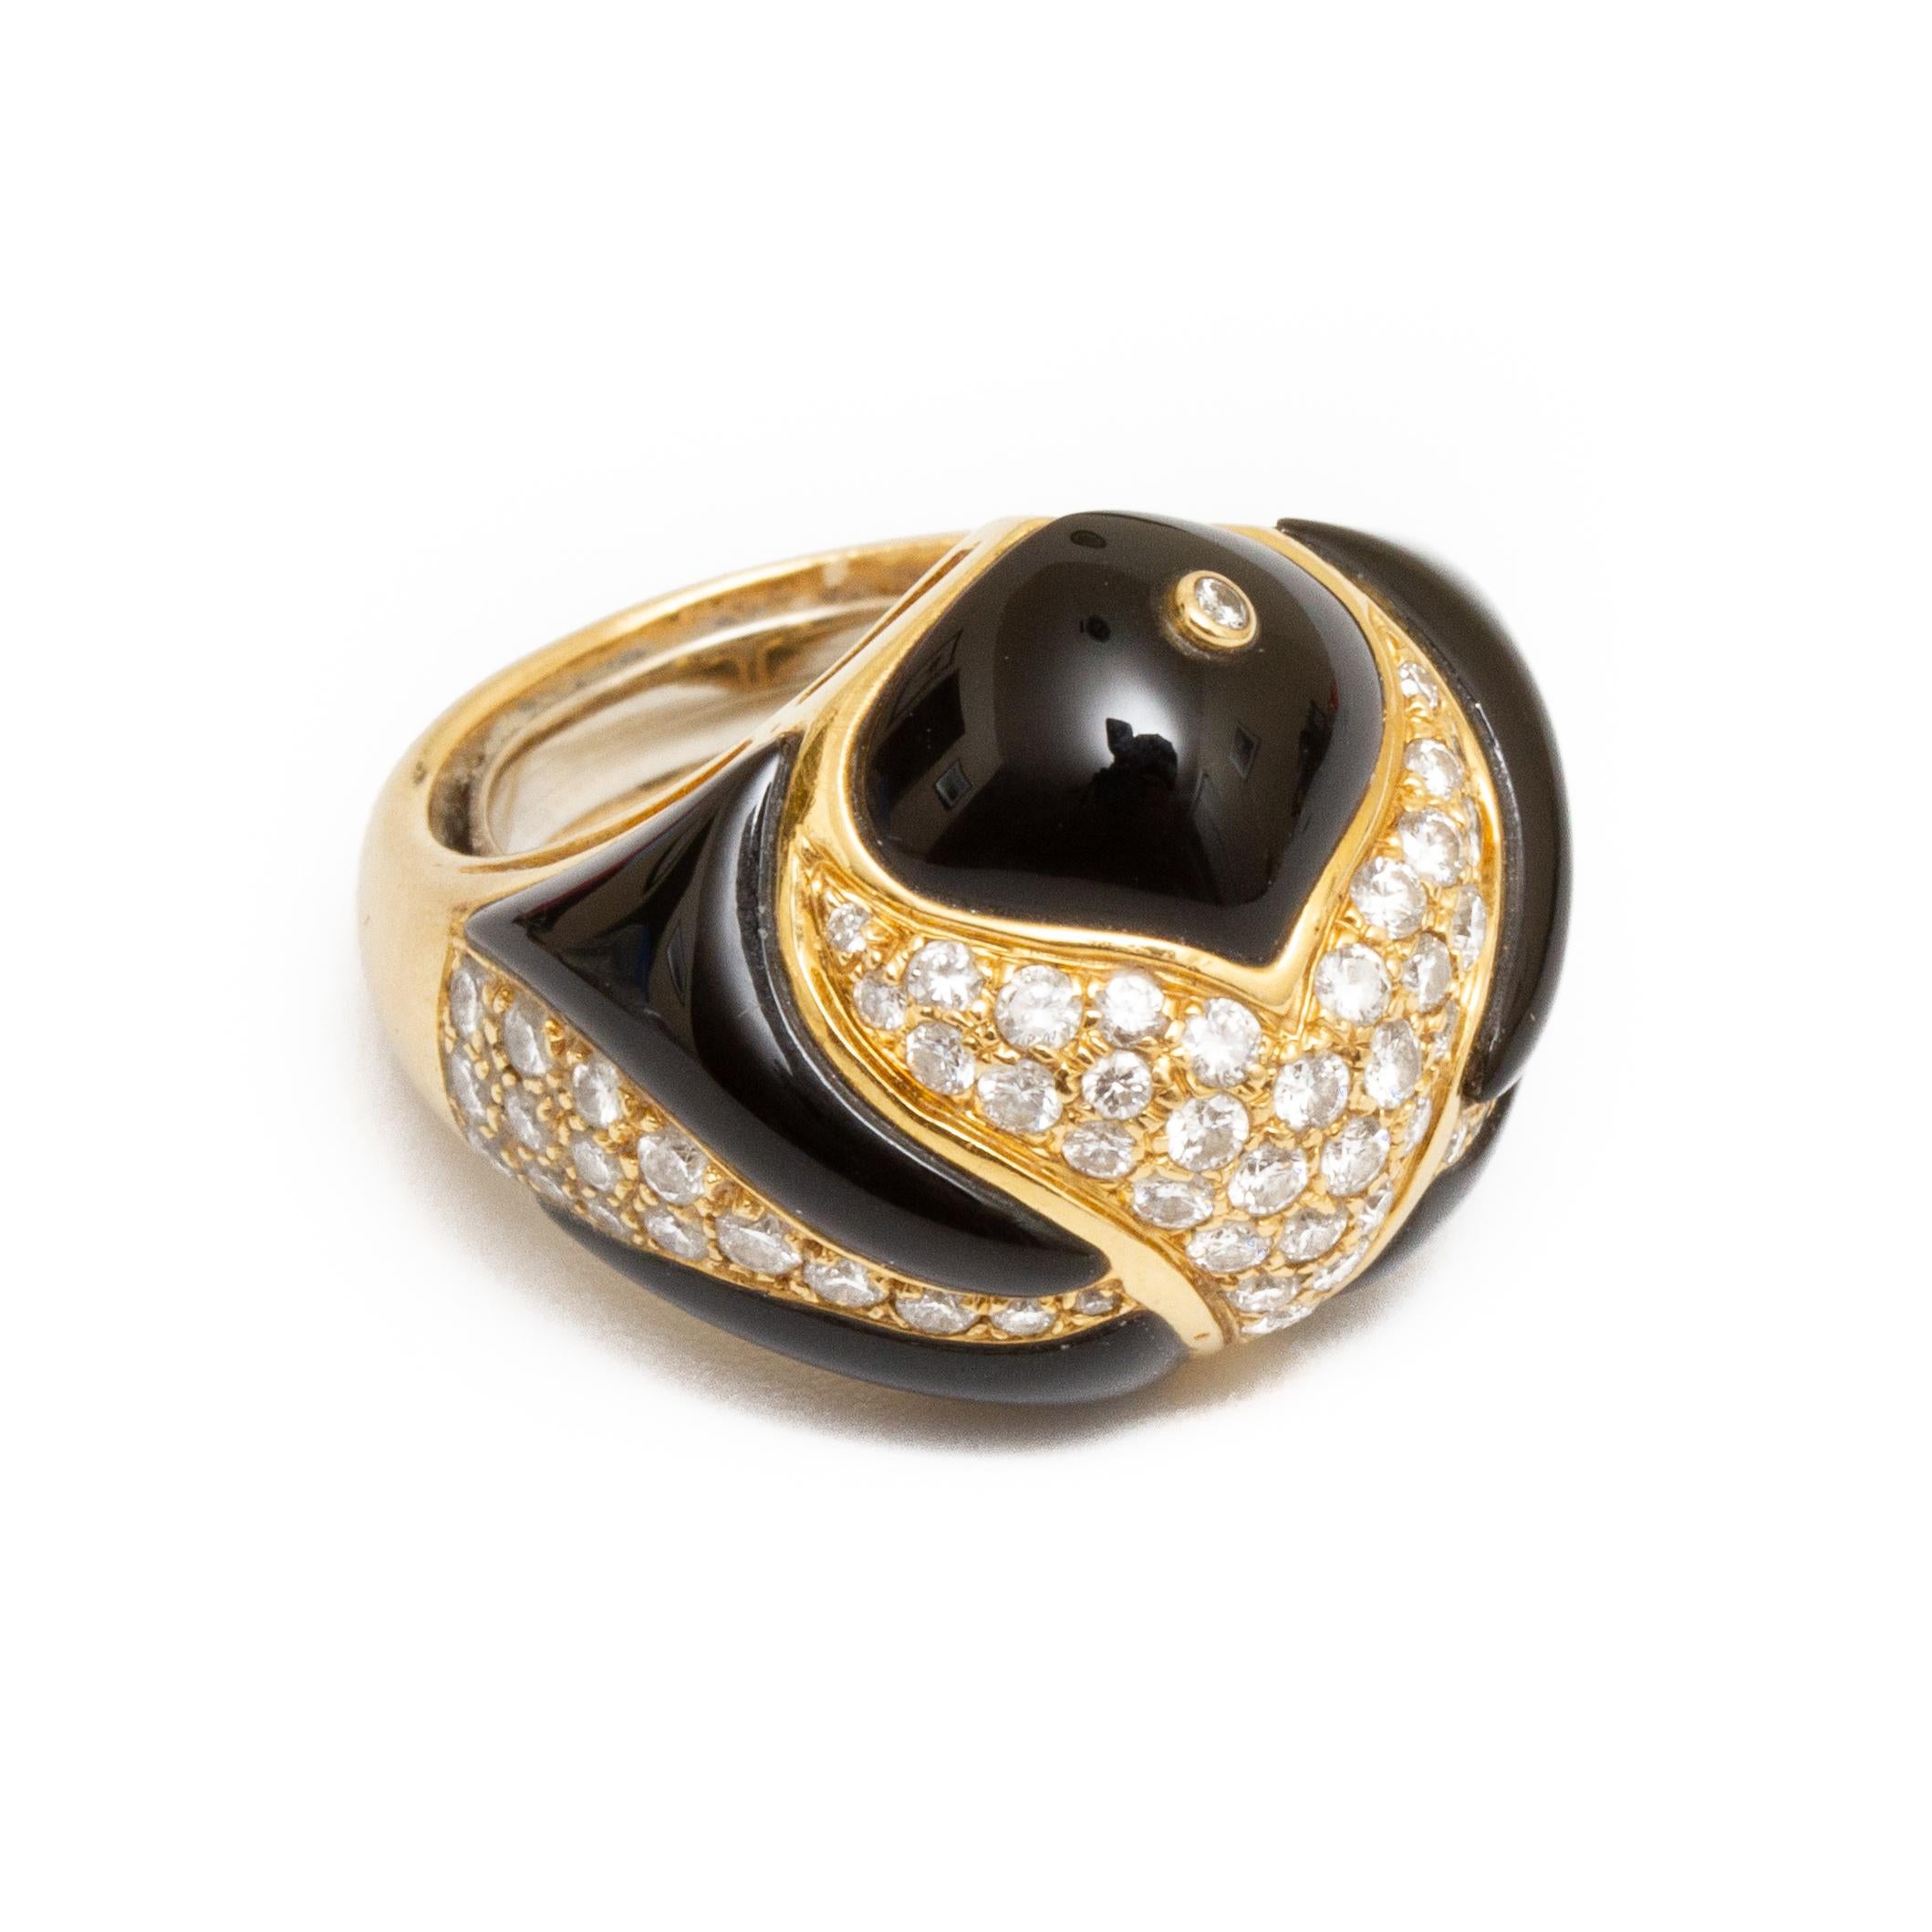 18k gold, diamond and carved black onyx ring with approx. 65 diamonds totaling approx. 1.25 cts approx. size 6 without ring guard and weighing approx. 6.5 dwt From the Broussard estate noted jewelry collection Park Avenue New York